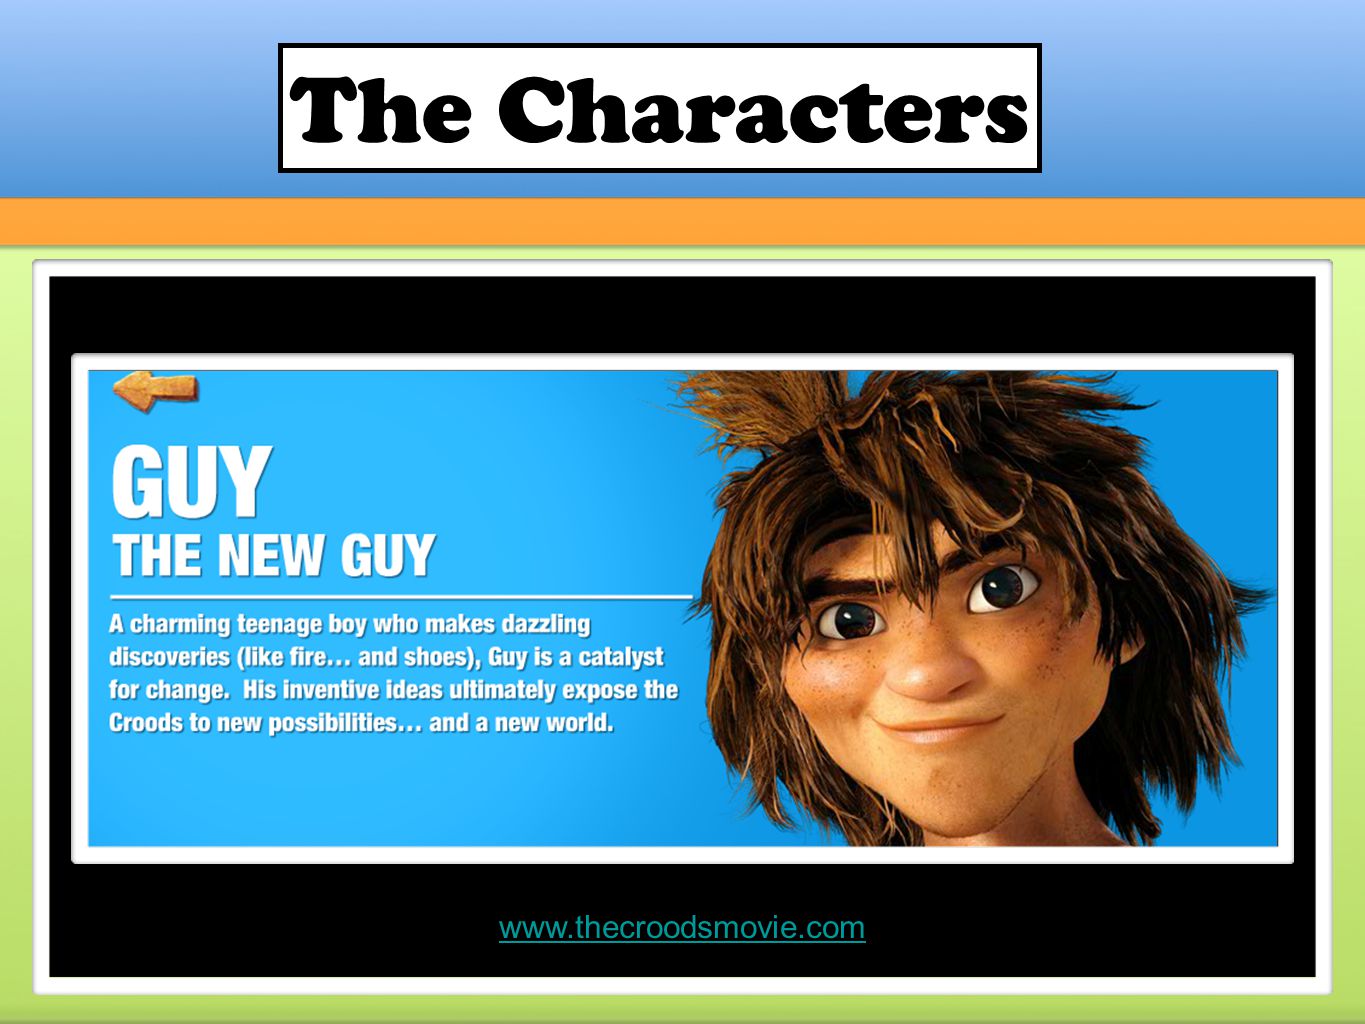 The Characters (Read slide)